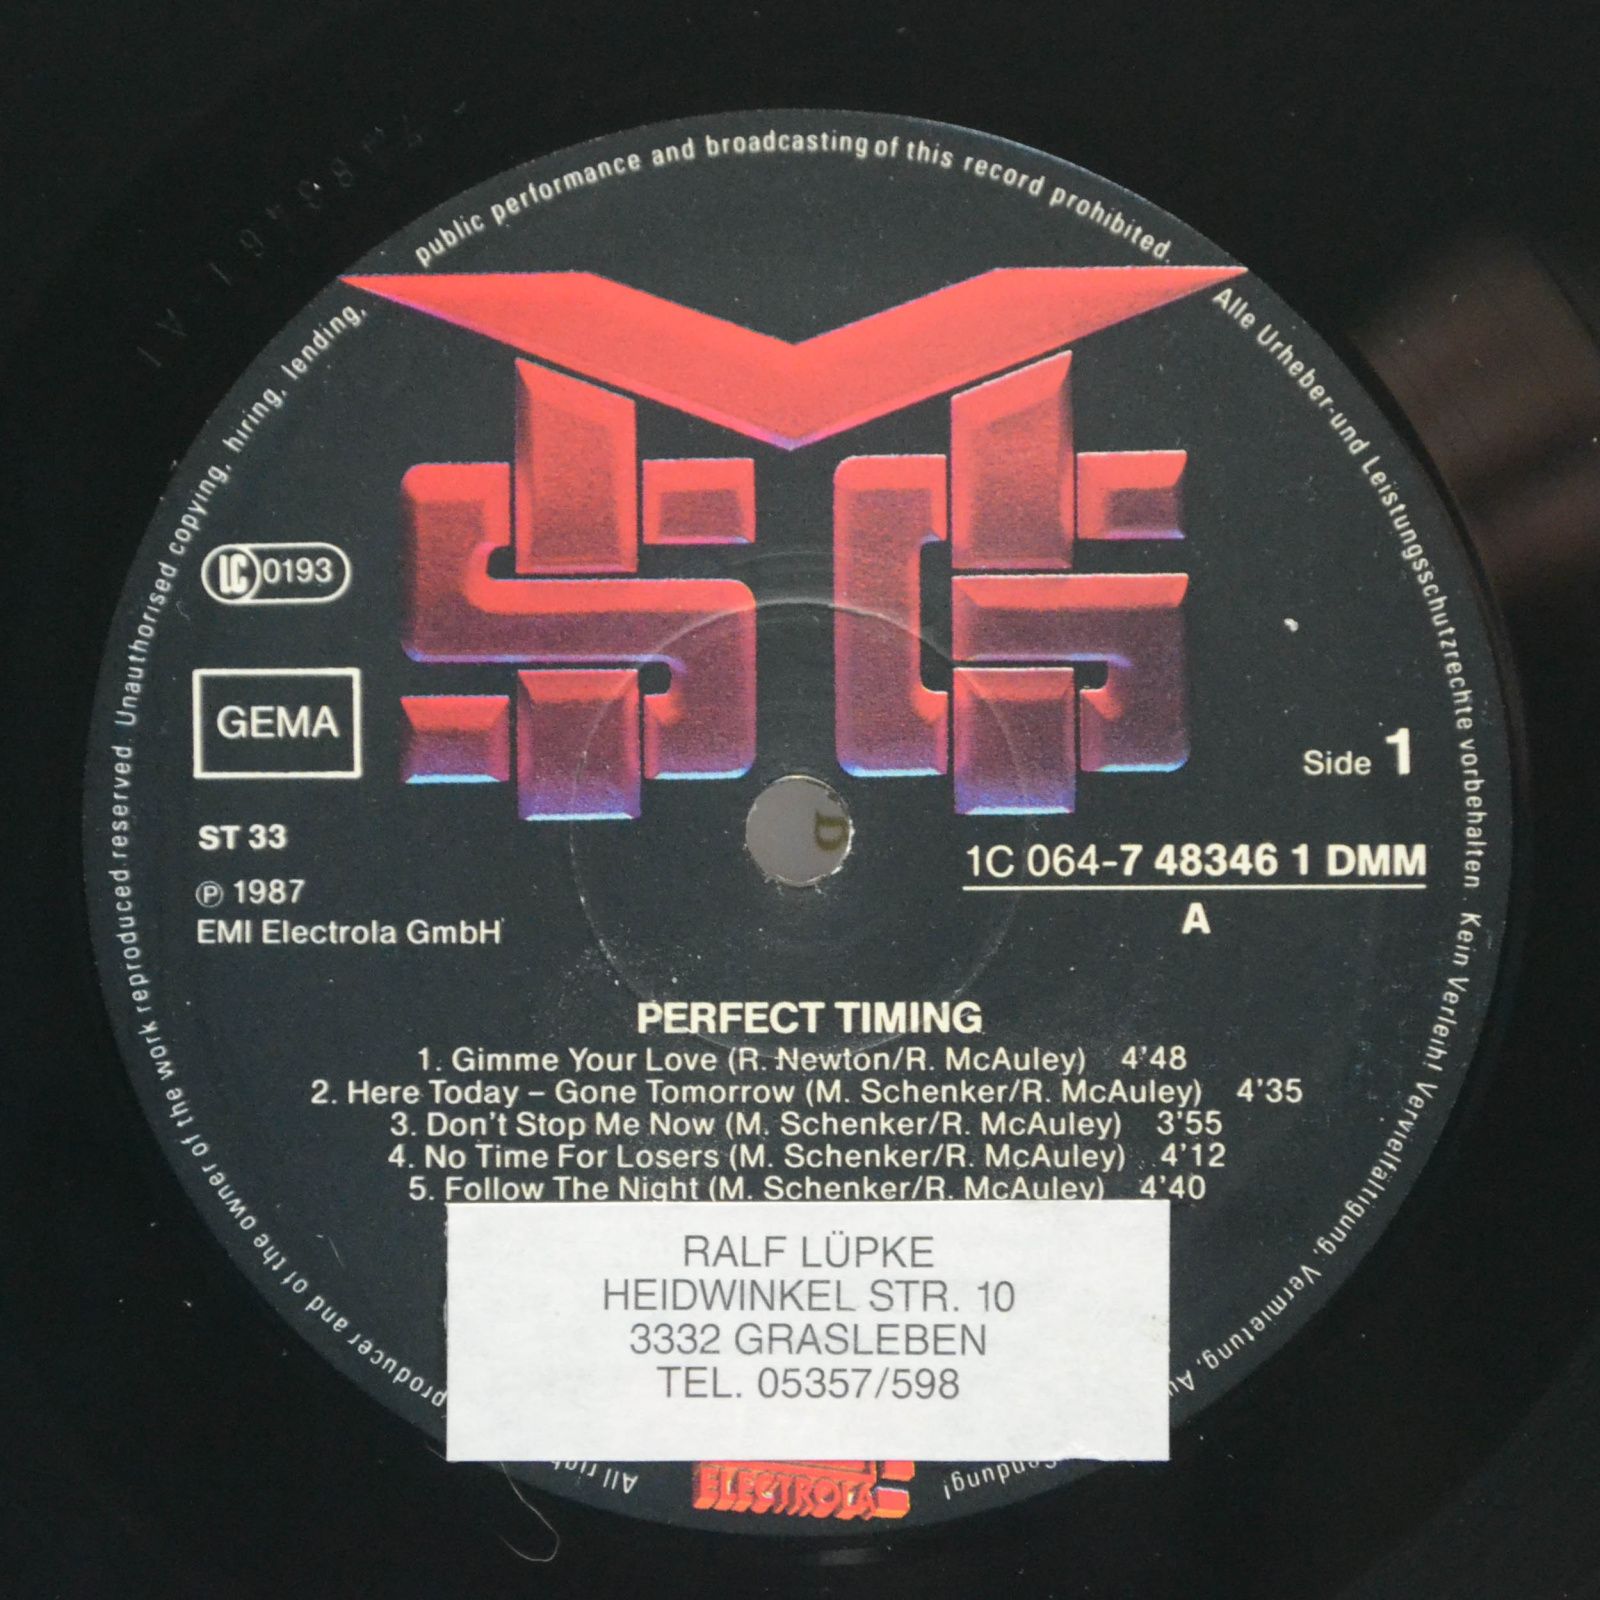 McAuley Schenker Group — Perfect Timing, 1987